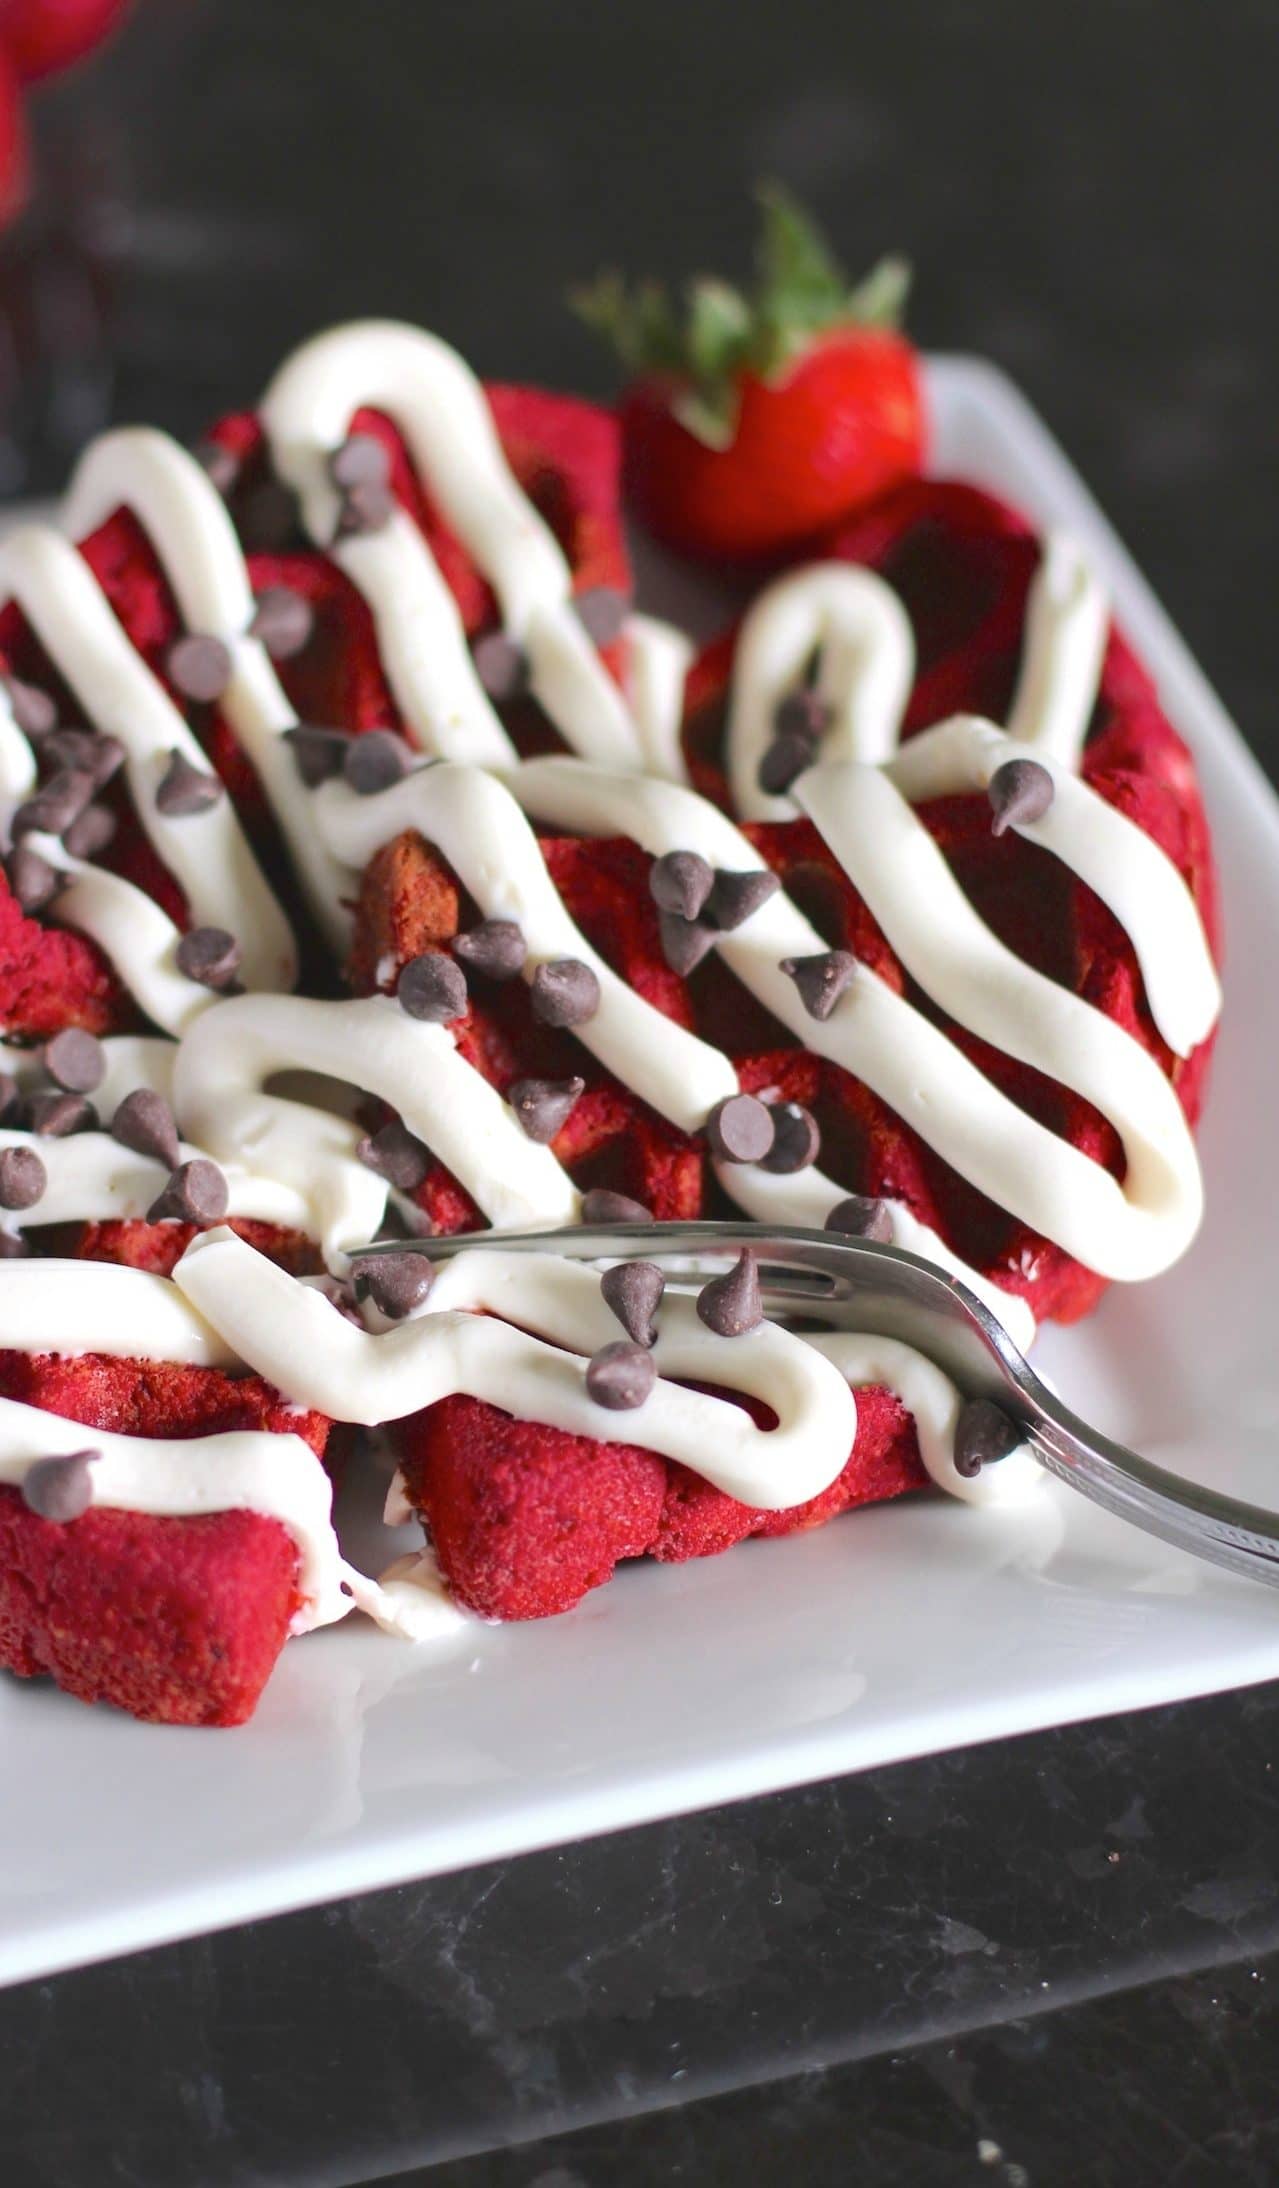 Healthy Low Carb and Gluten Free Red Velvet Waffles with Cream Cheese Frosting - Desserts with Benefits